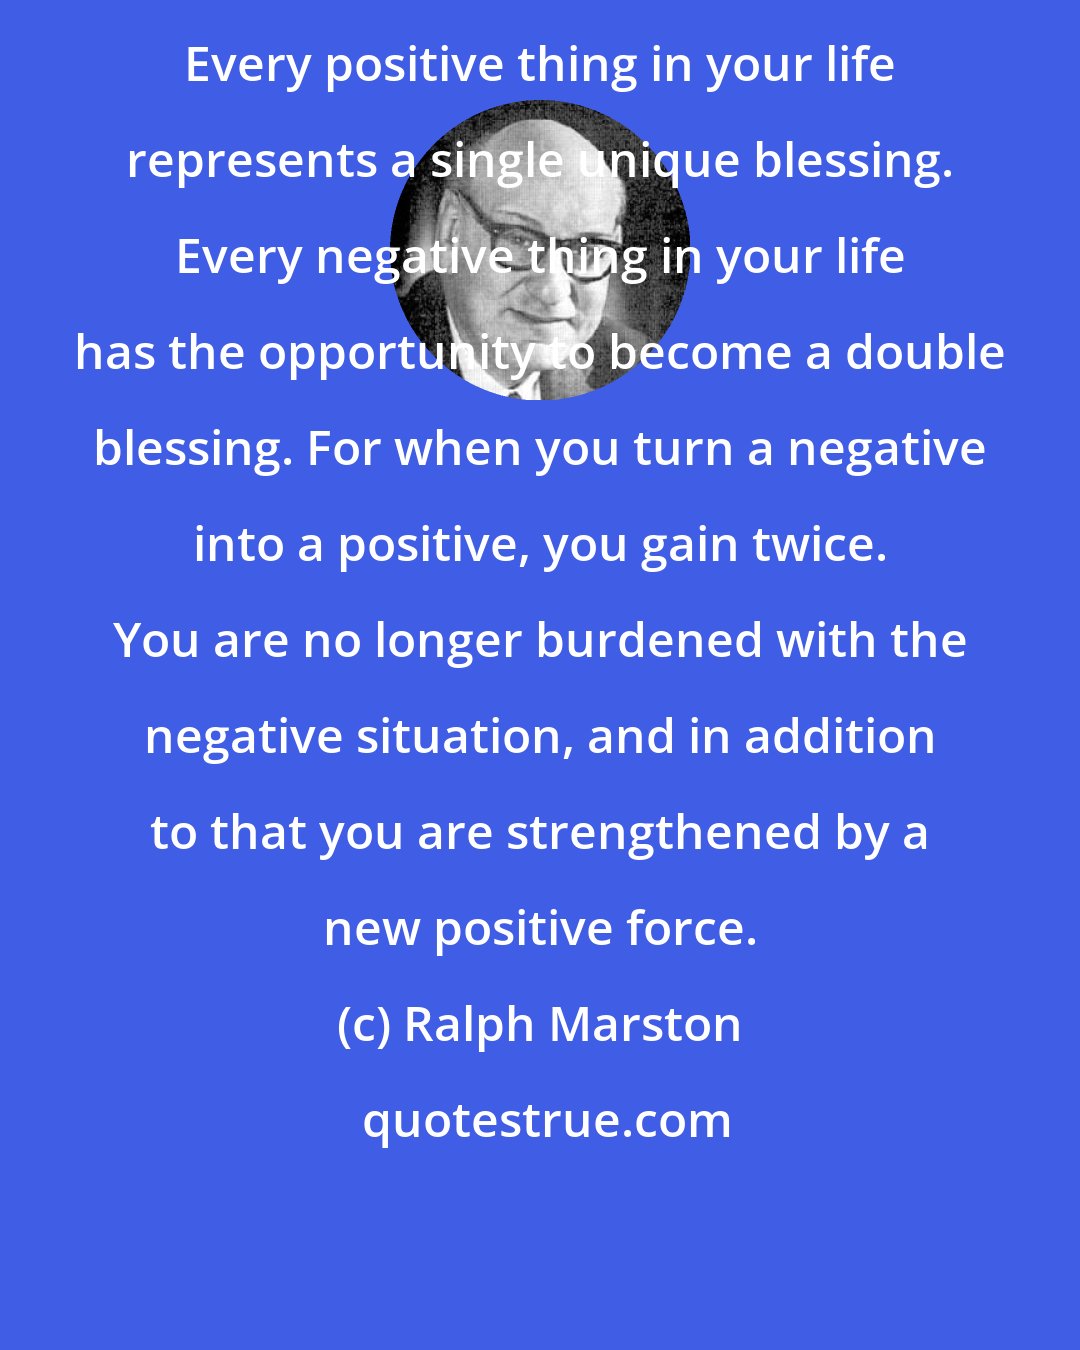 Ralph Marston: Every positive thing in your life represents a single unique blessing. Every negative thing in your life has the opportunity to become a double blessing. For when you turn a negative into a positive, you gain twice. You are no longer burdened with the negative situation, and in addition to that you are strengthened by a new positive force.